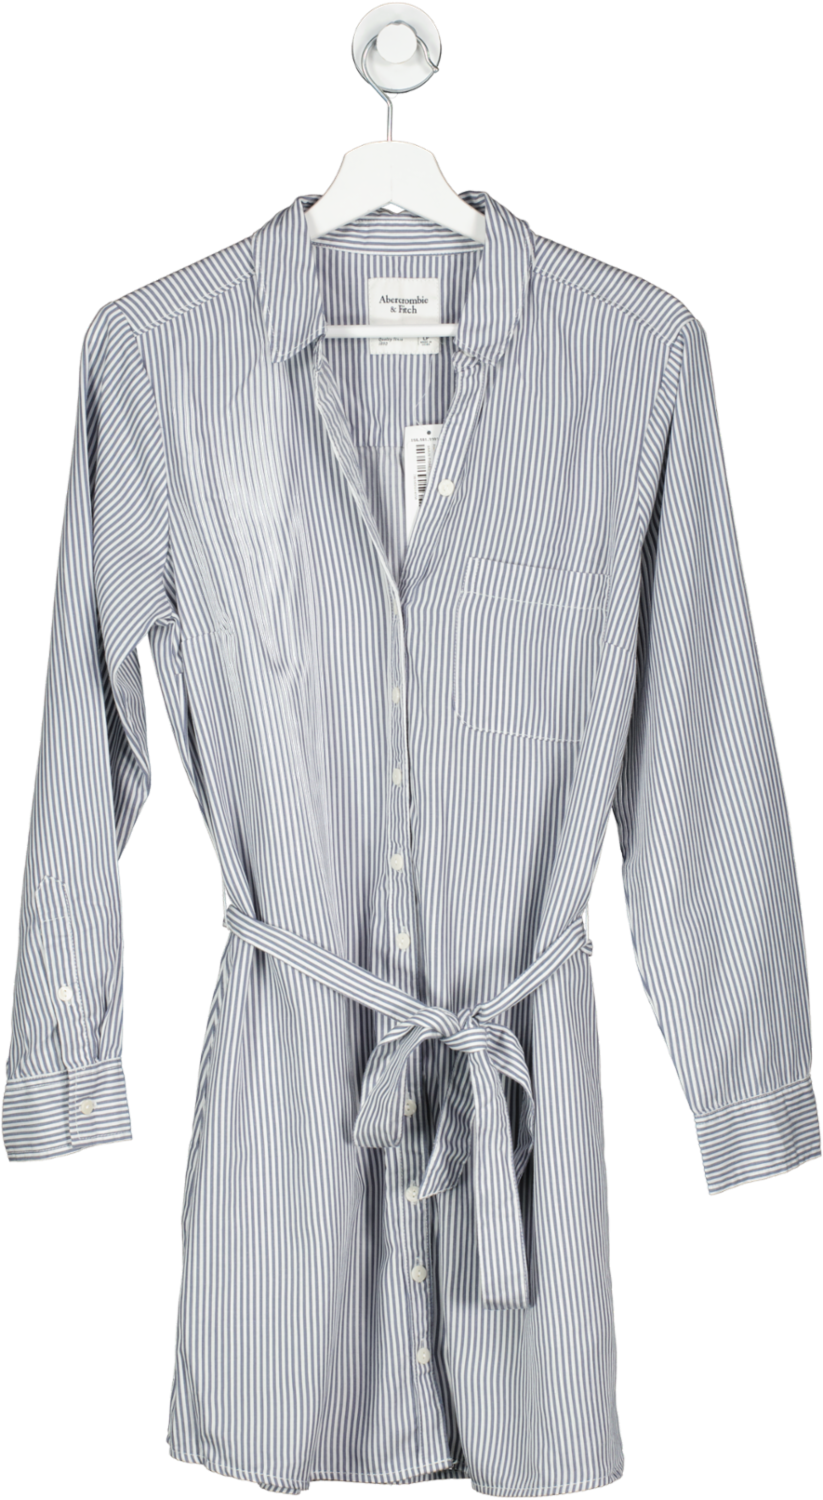 Abercrombie & Fitch White Belted Shirt Dress UK L